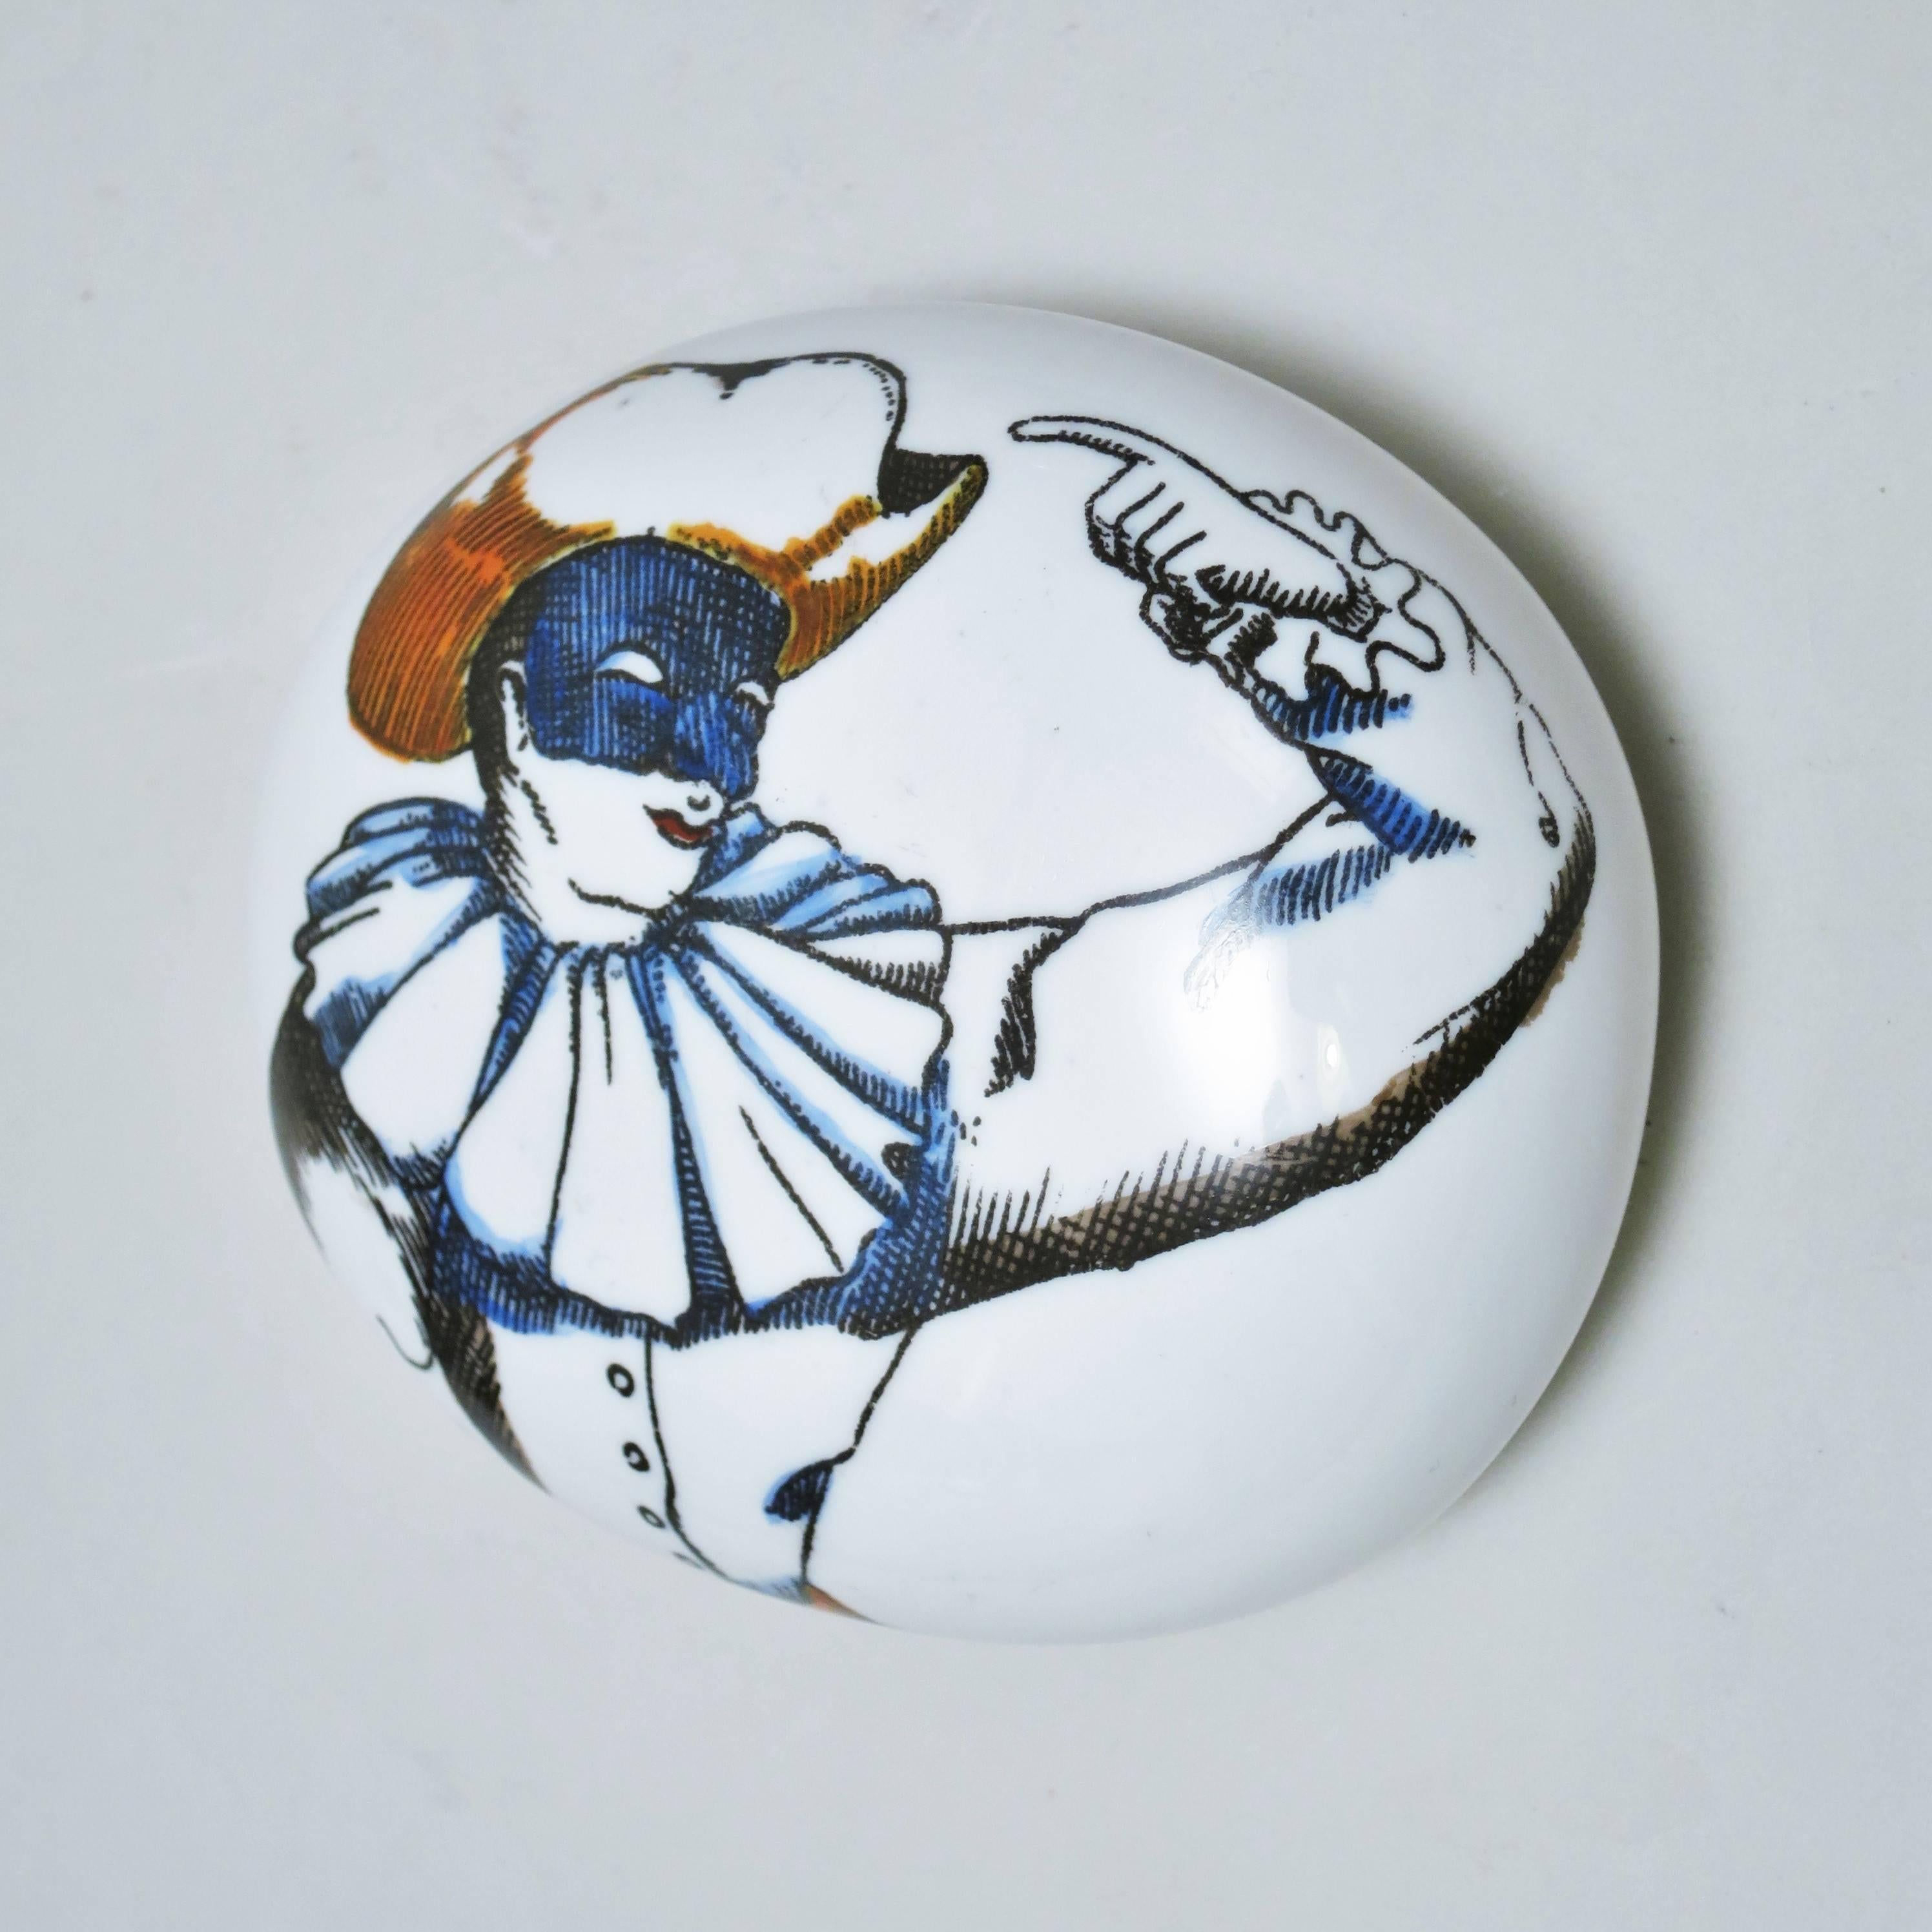 Porcelain pebble paperweight with a decor of a character from the Commedia dell'arte: Pulcinella (Punchinello) by Piero Fornasetti, circa 1950. Signature under the base.